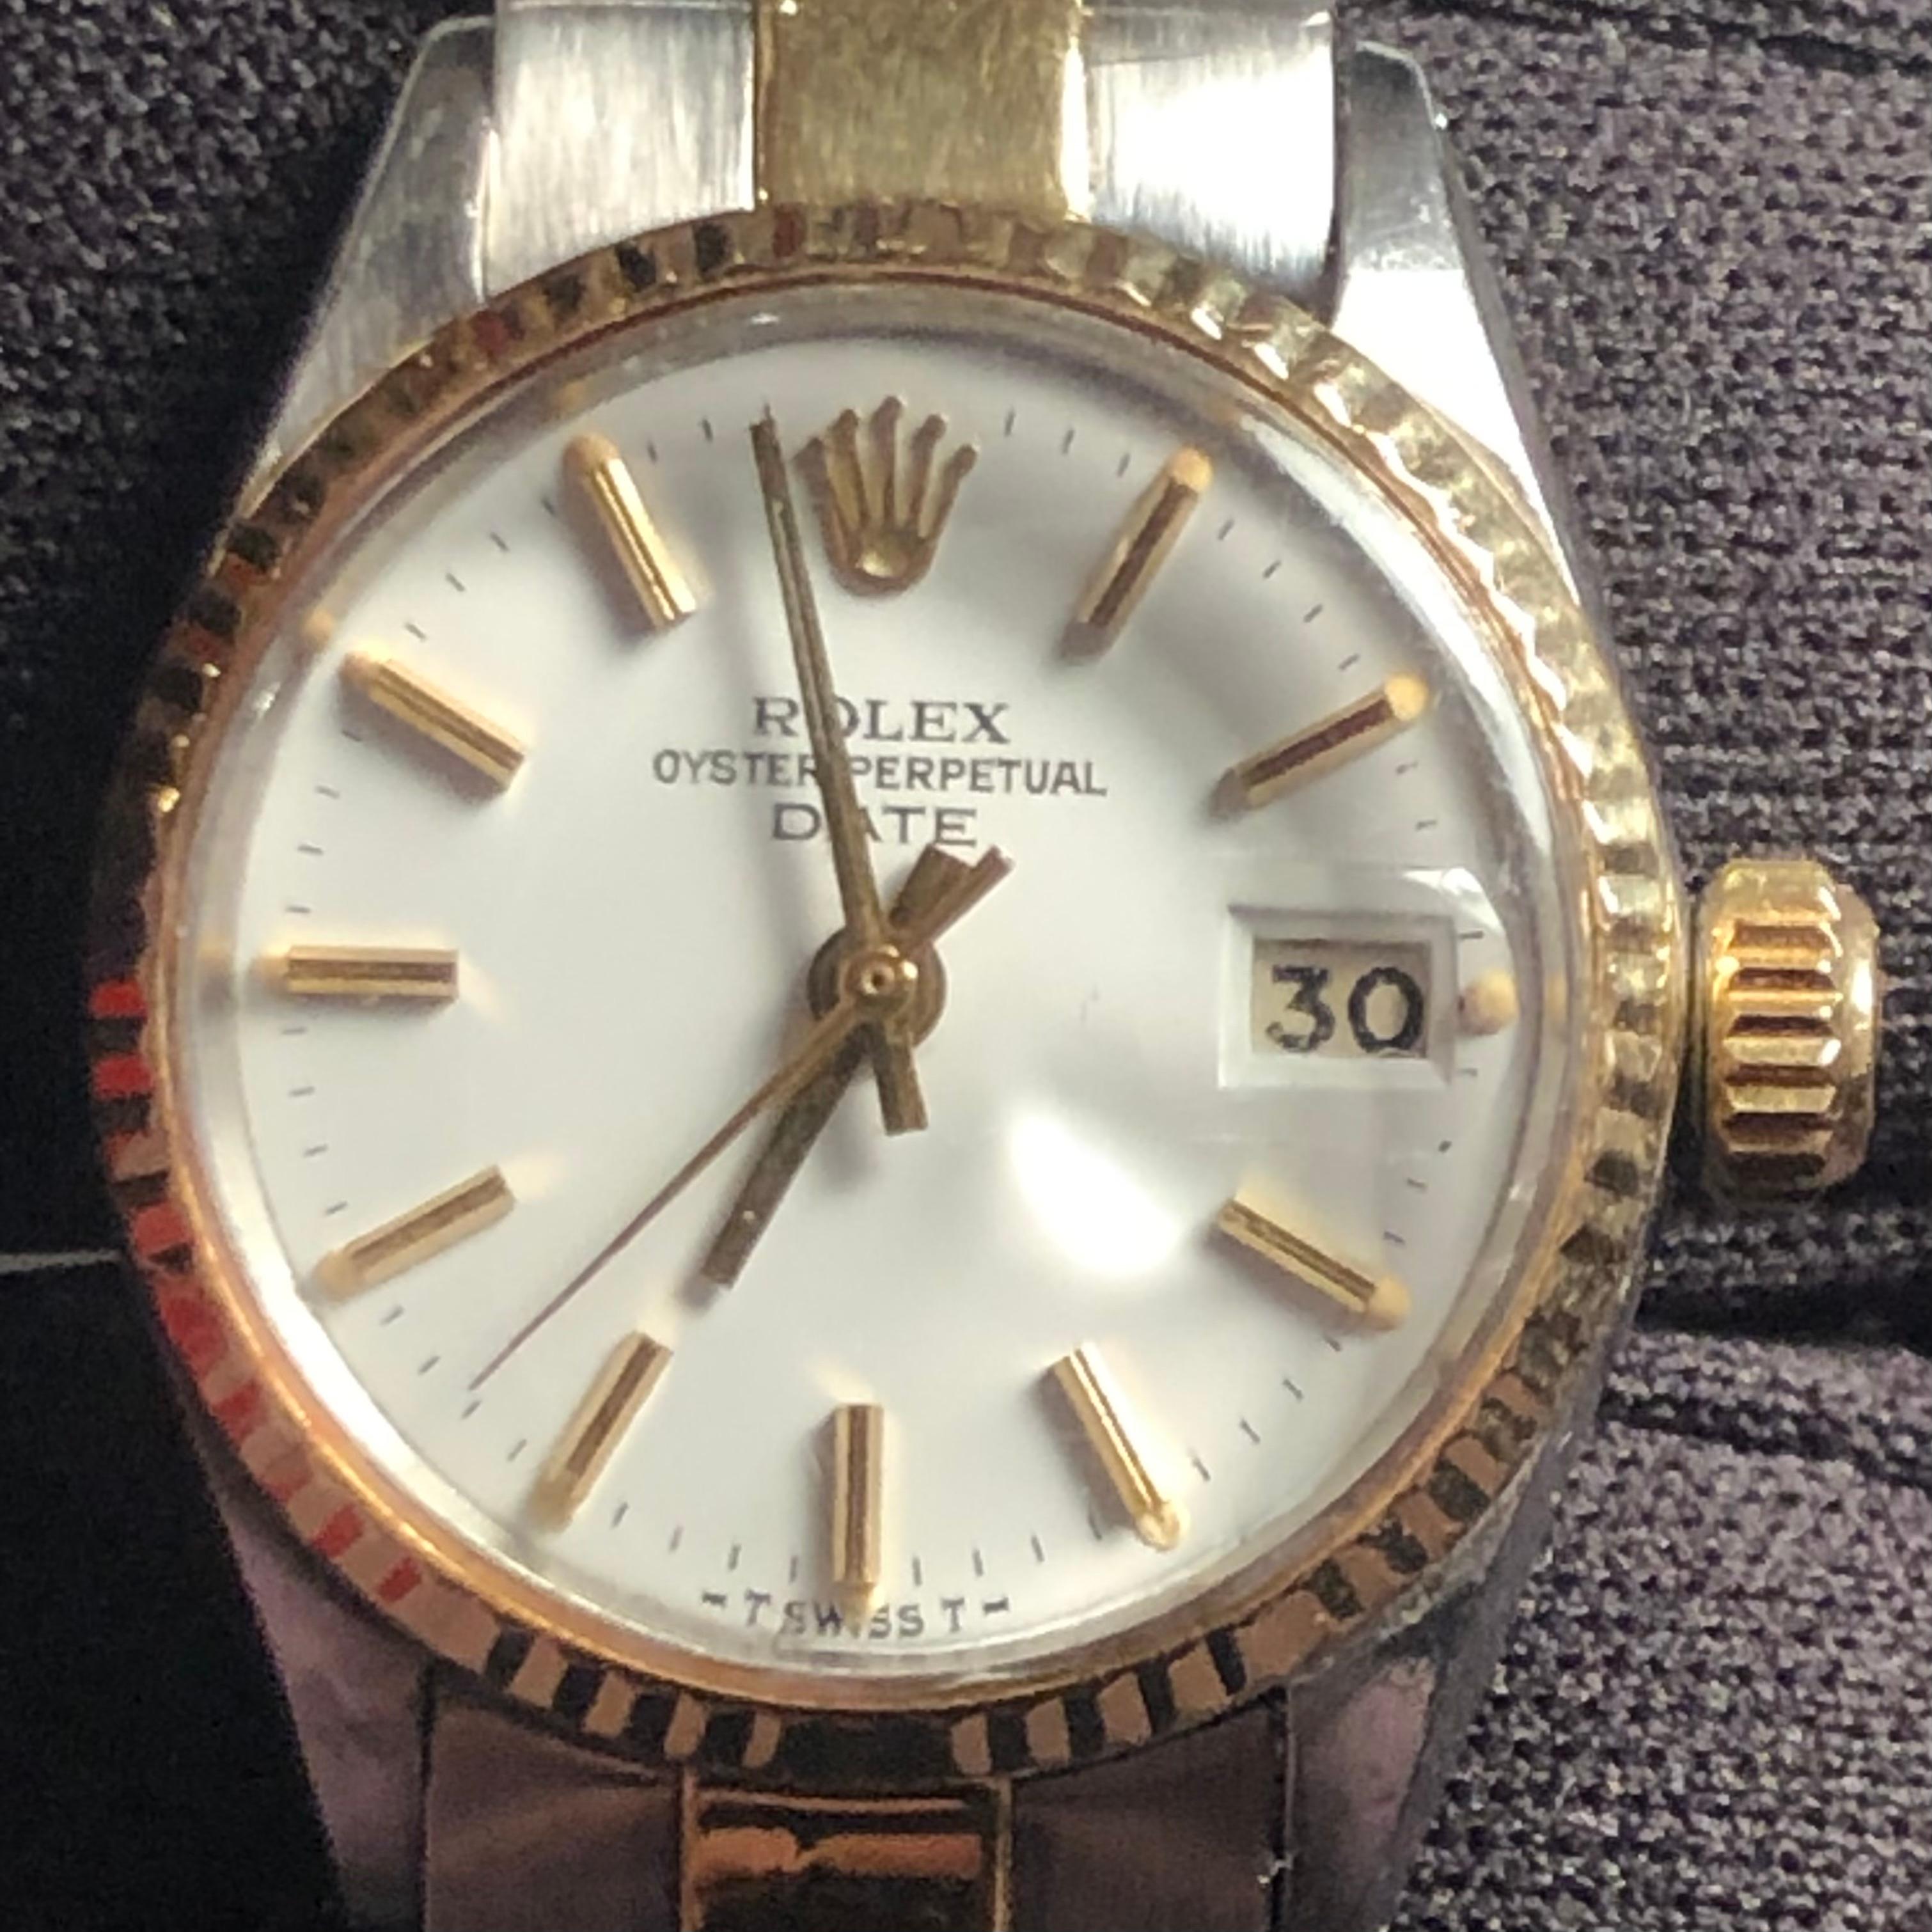 Rolex Oyster Perpetual 6517 two tone 14k Lady Date 26mm white dial ladies watch. The Rolex movement is running and it's an official self-winding Rolex automatic movement.

This original genuine Rolex timepiece features a 14k yellow gold fluted bezel